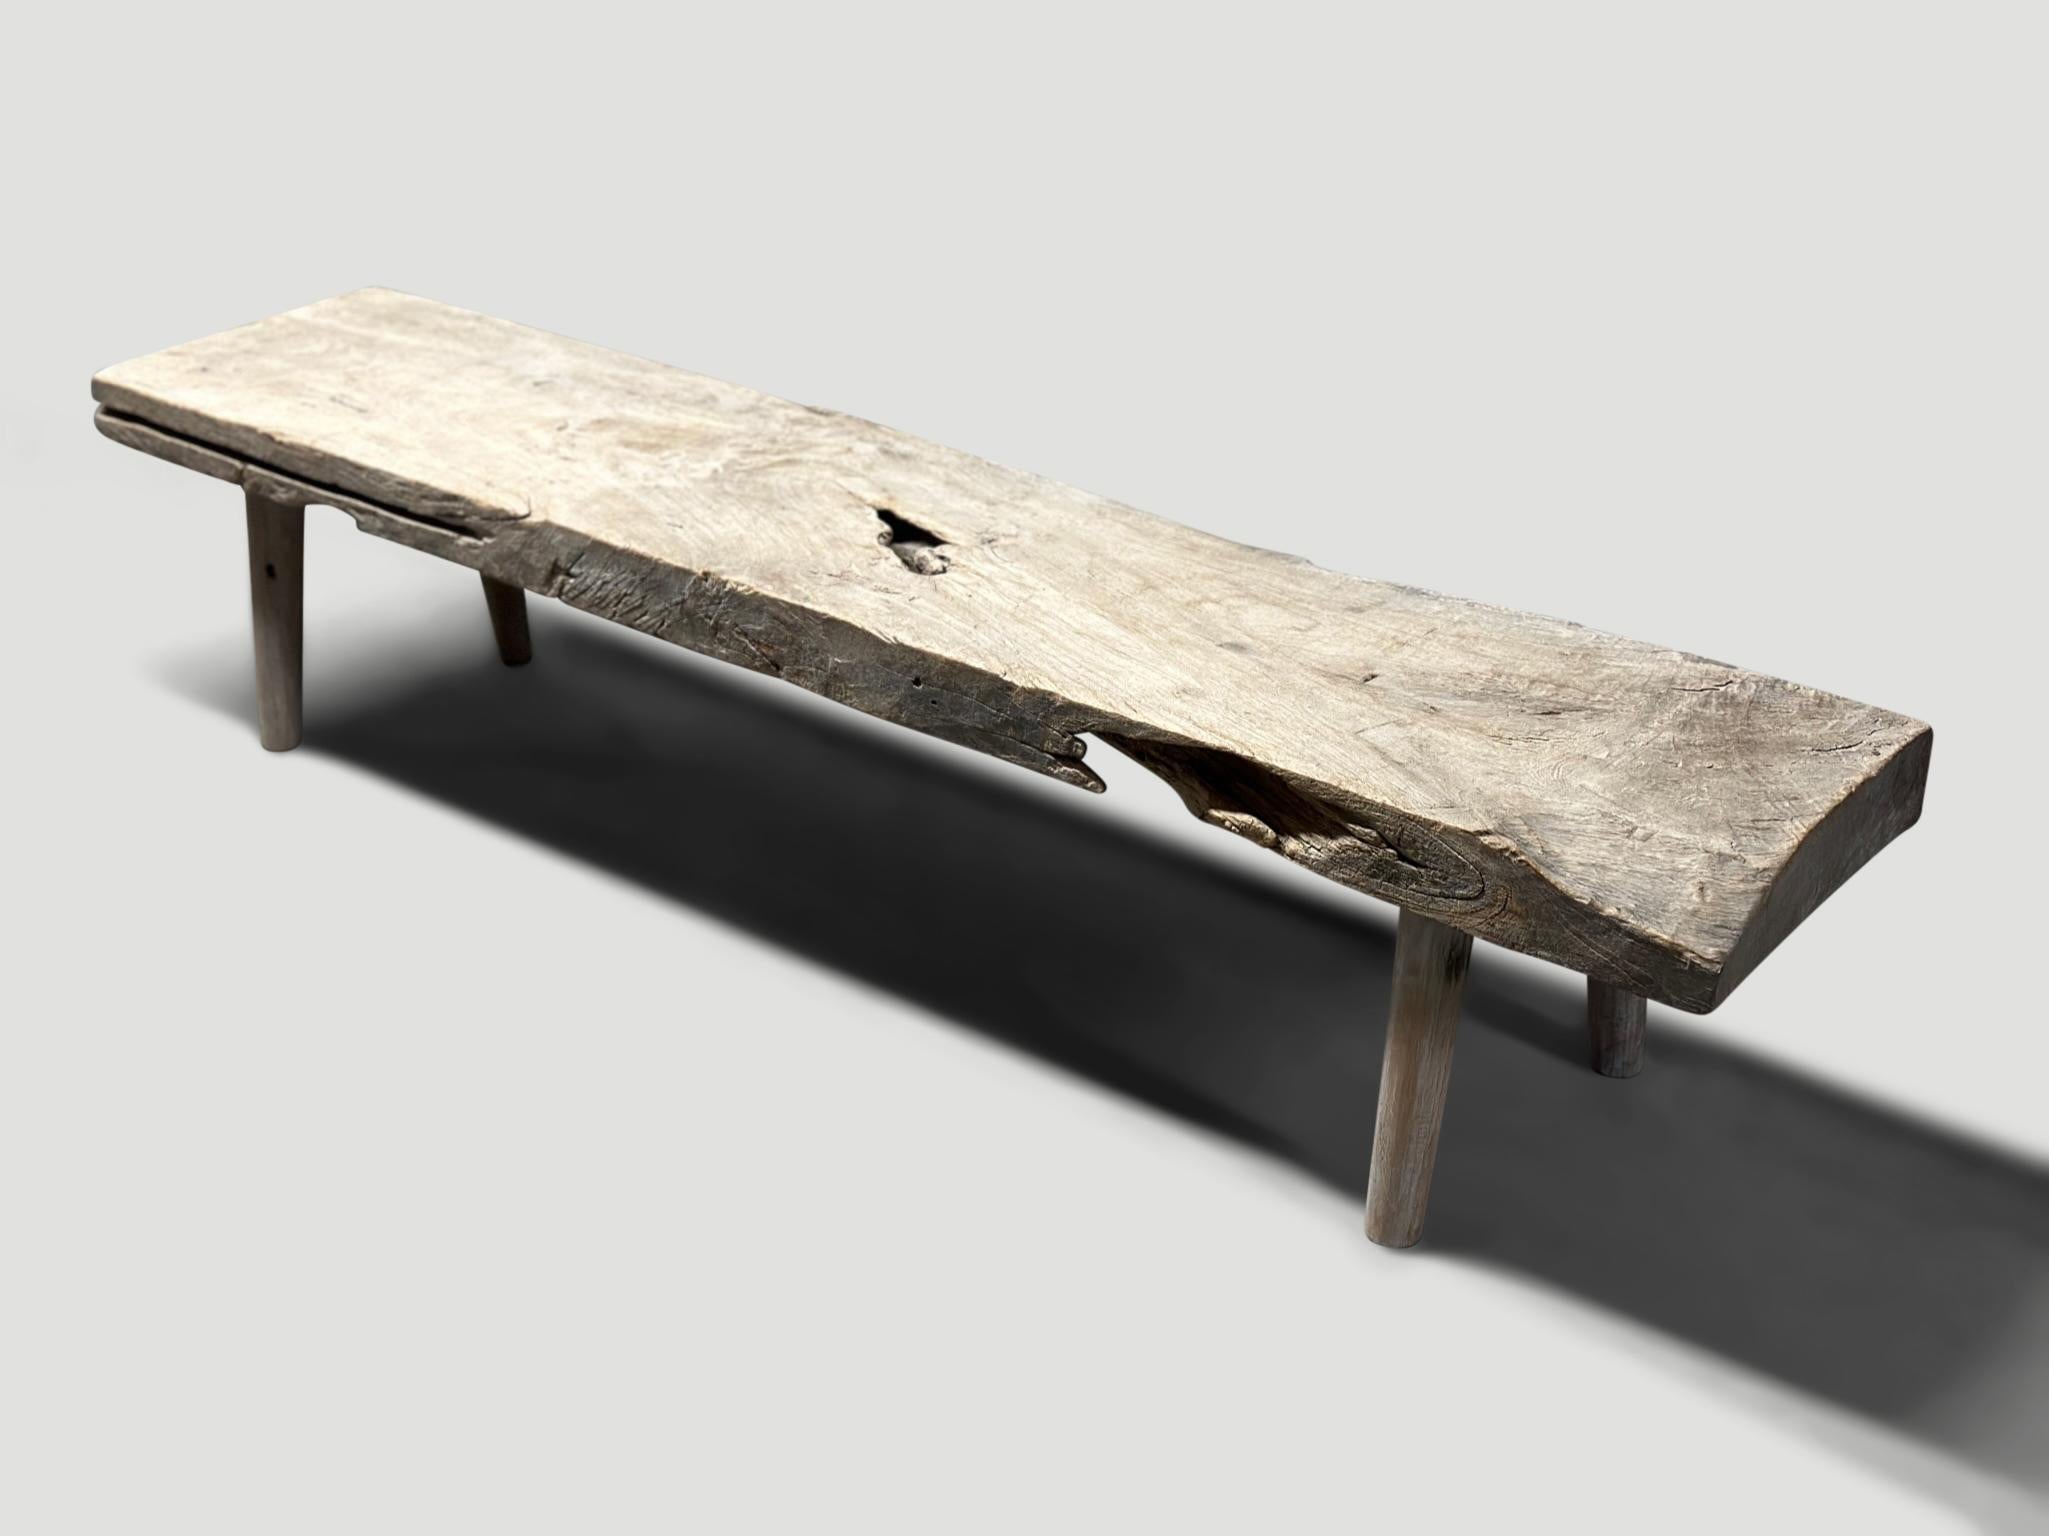 Impressive three inch thick teak bench in pale wood tones, resembling stone. Beautiful details in this 100 year old wood. We added minimalist cylinder legs. Both usable and a piece of art. Rare.

This bench was hand made in the spirit of Wabi-Sabi,